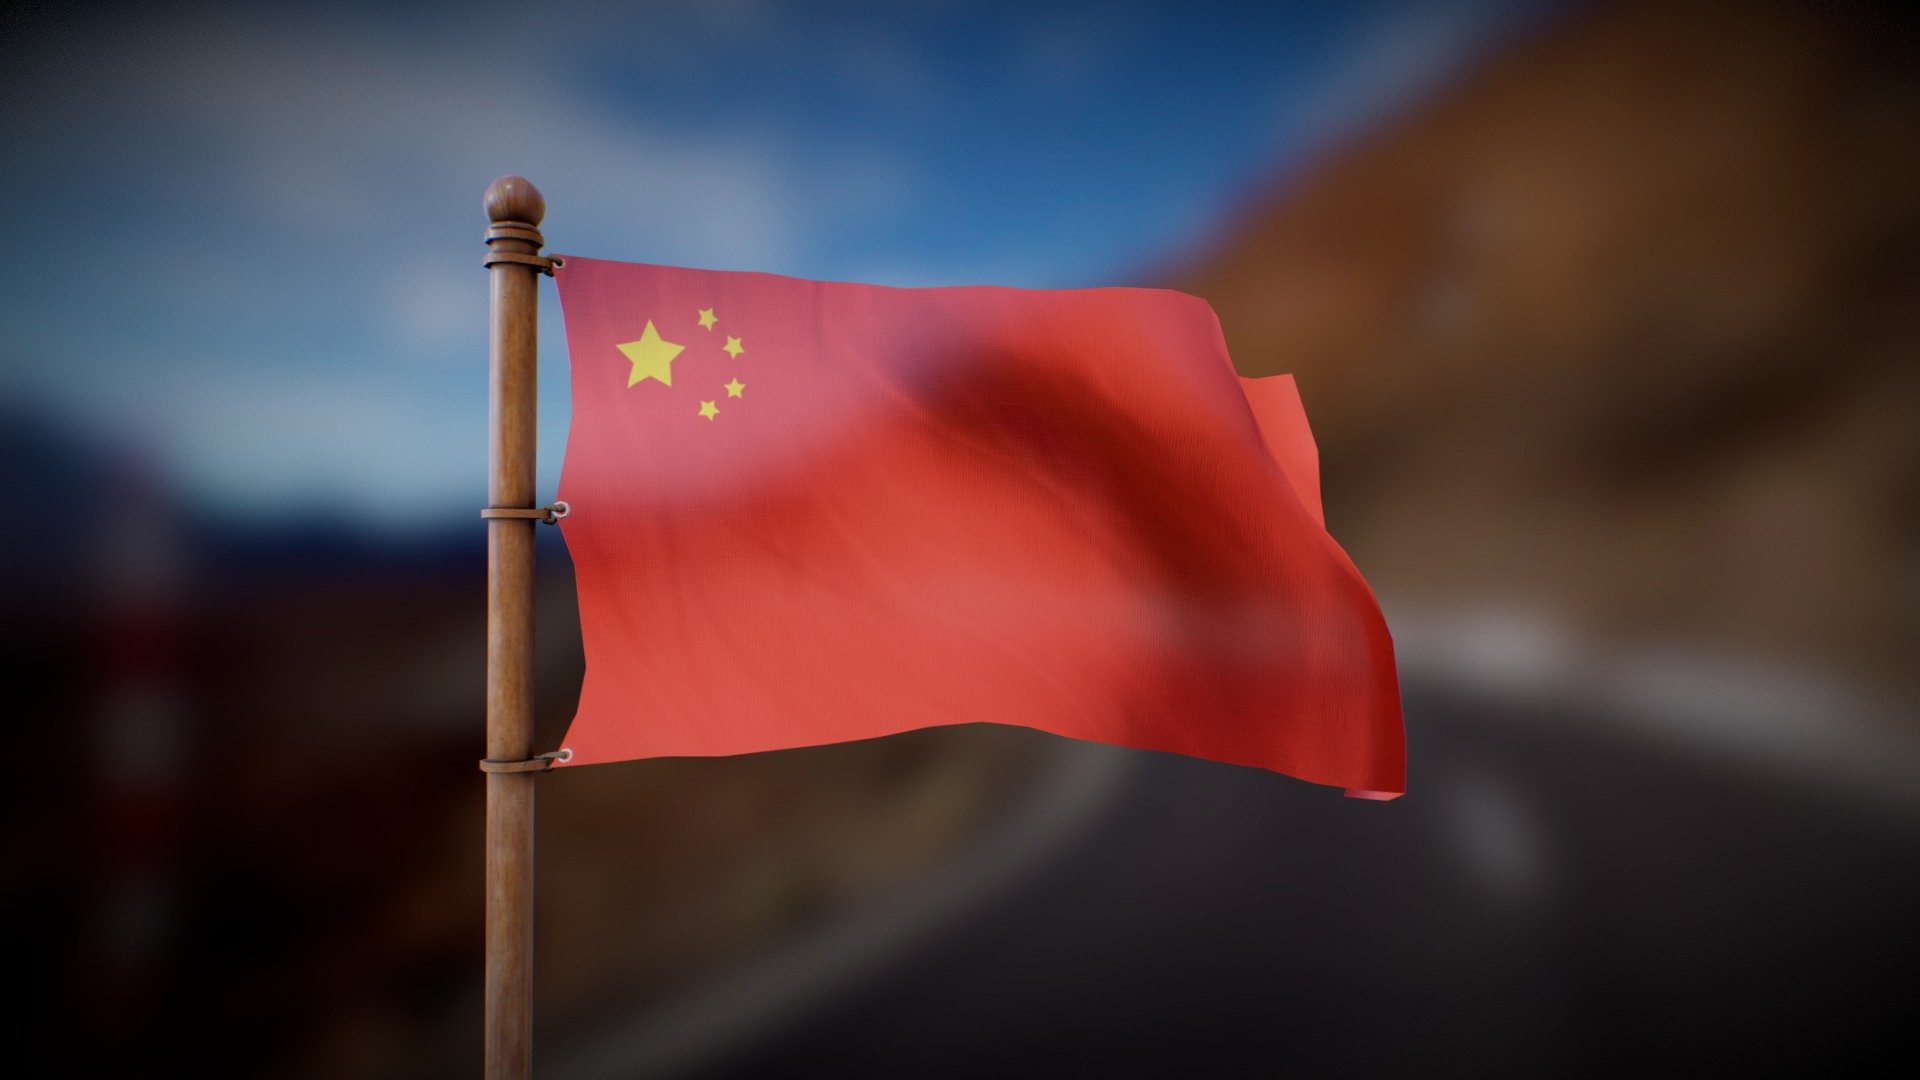 Flag waving in the wind in a looped animation

Joint Animation, perfect for any purpose
4K PBR textures

Feel free to DM me for anu question of custom requests :) - China Flag - Wind Animated Loop - Buy Royalty Free 3D model by Deftroy 3d model